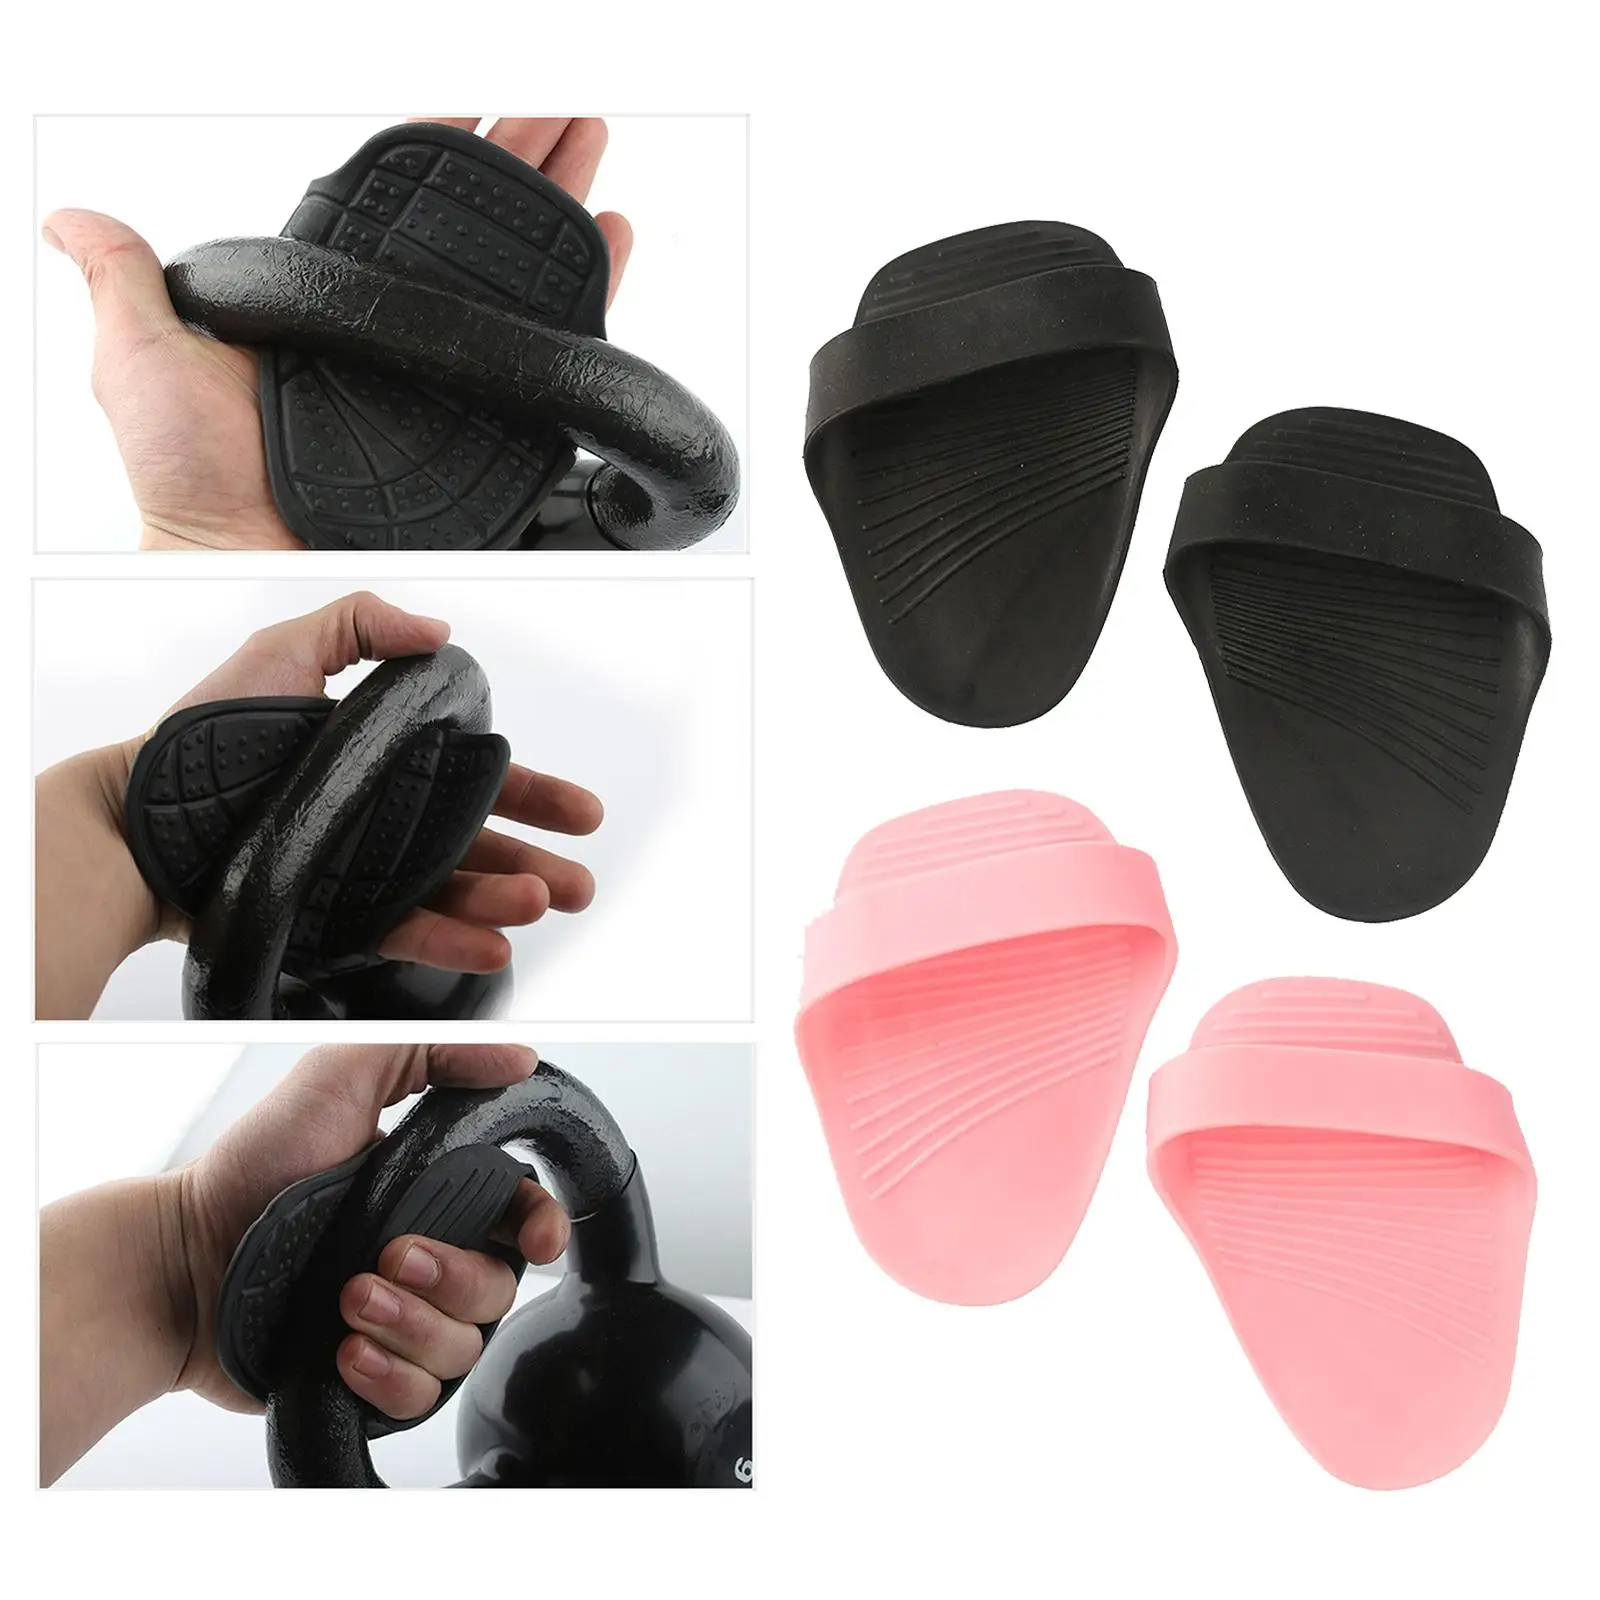 Anti Skid Weight Lifting Hand Guard Gloves Dumbbell Pull Up Grip Protector Pads Fitness Sport Home Gym Workout Accessory